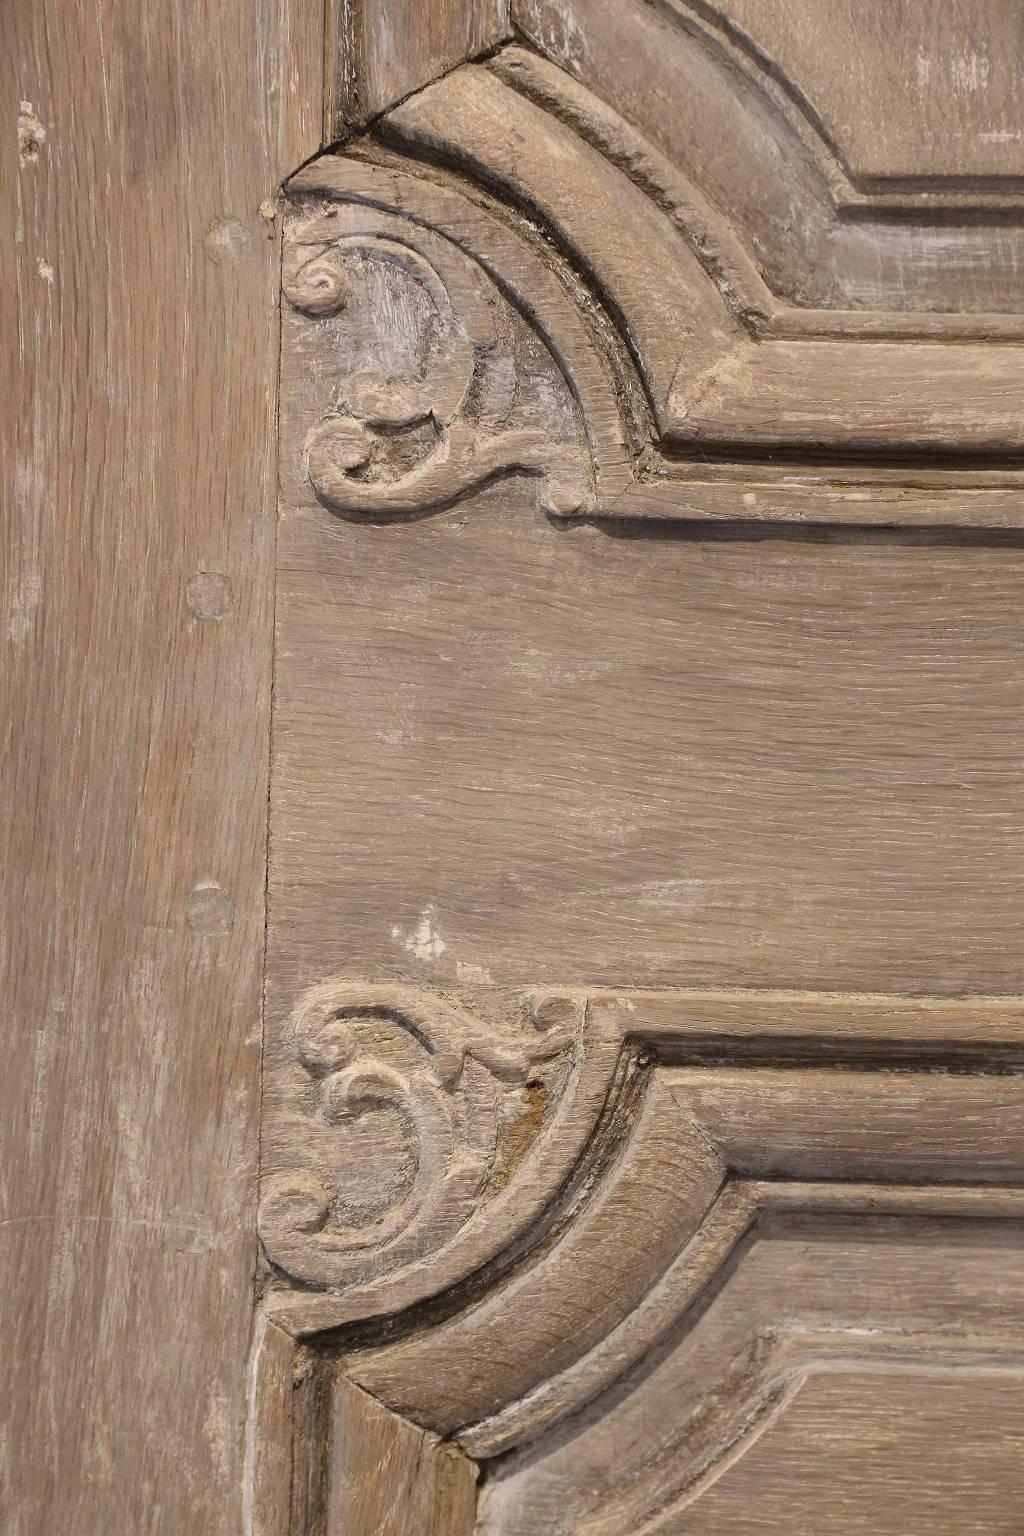 18th century Italian doors, large scale and beautifully hand-carved circa 1780-1800. Subtle remnants of old paint, beautiful patina and original hinges, restored working lock and new 18th century style key.

The left door measures 29 inches wide and